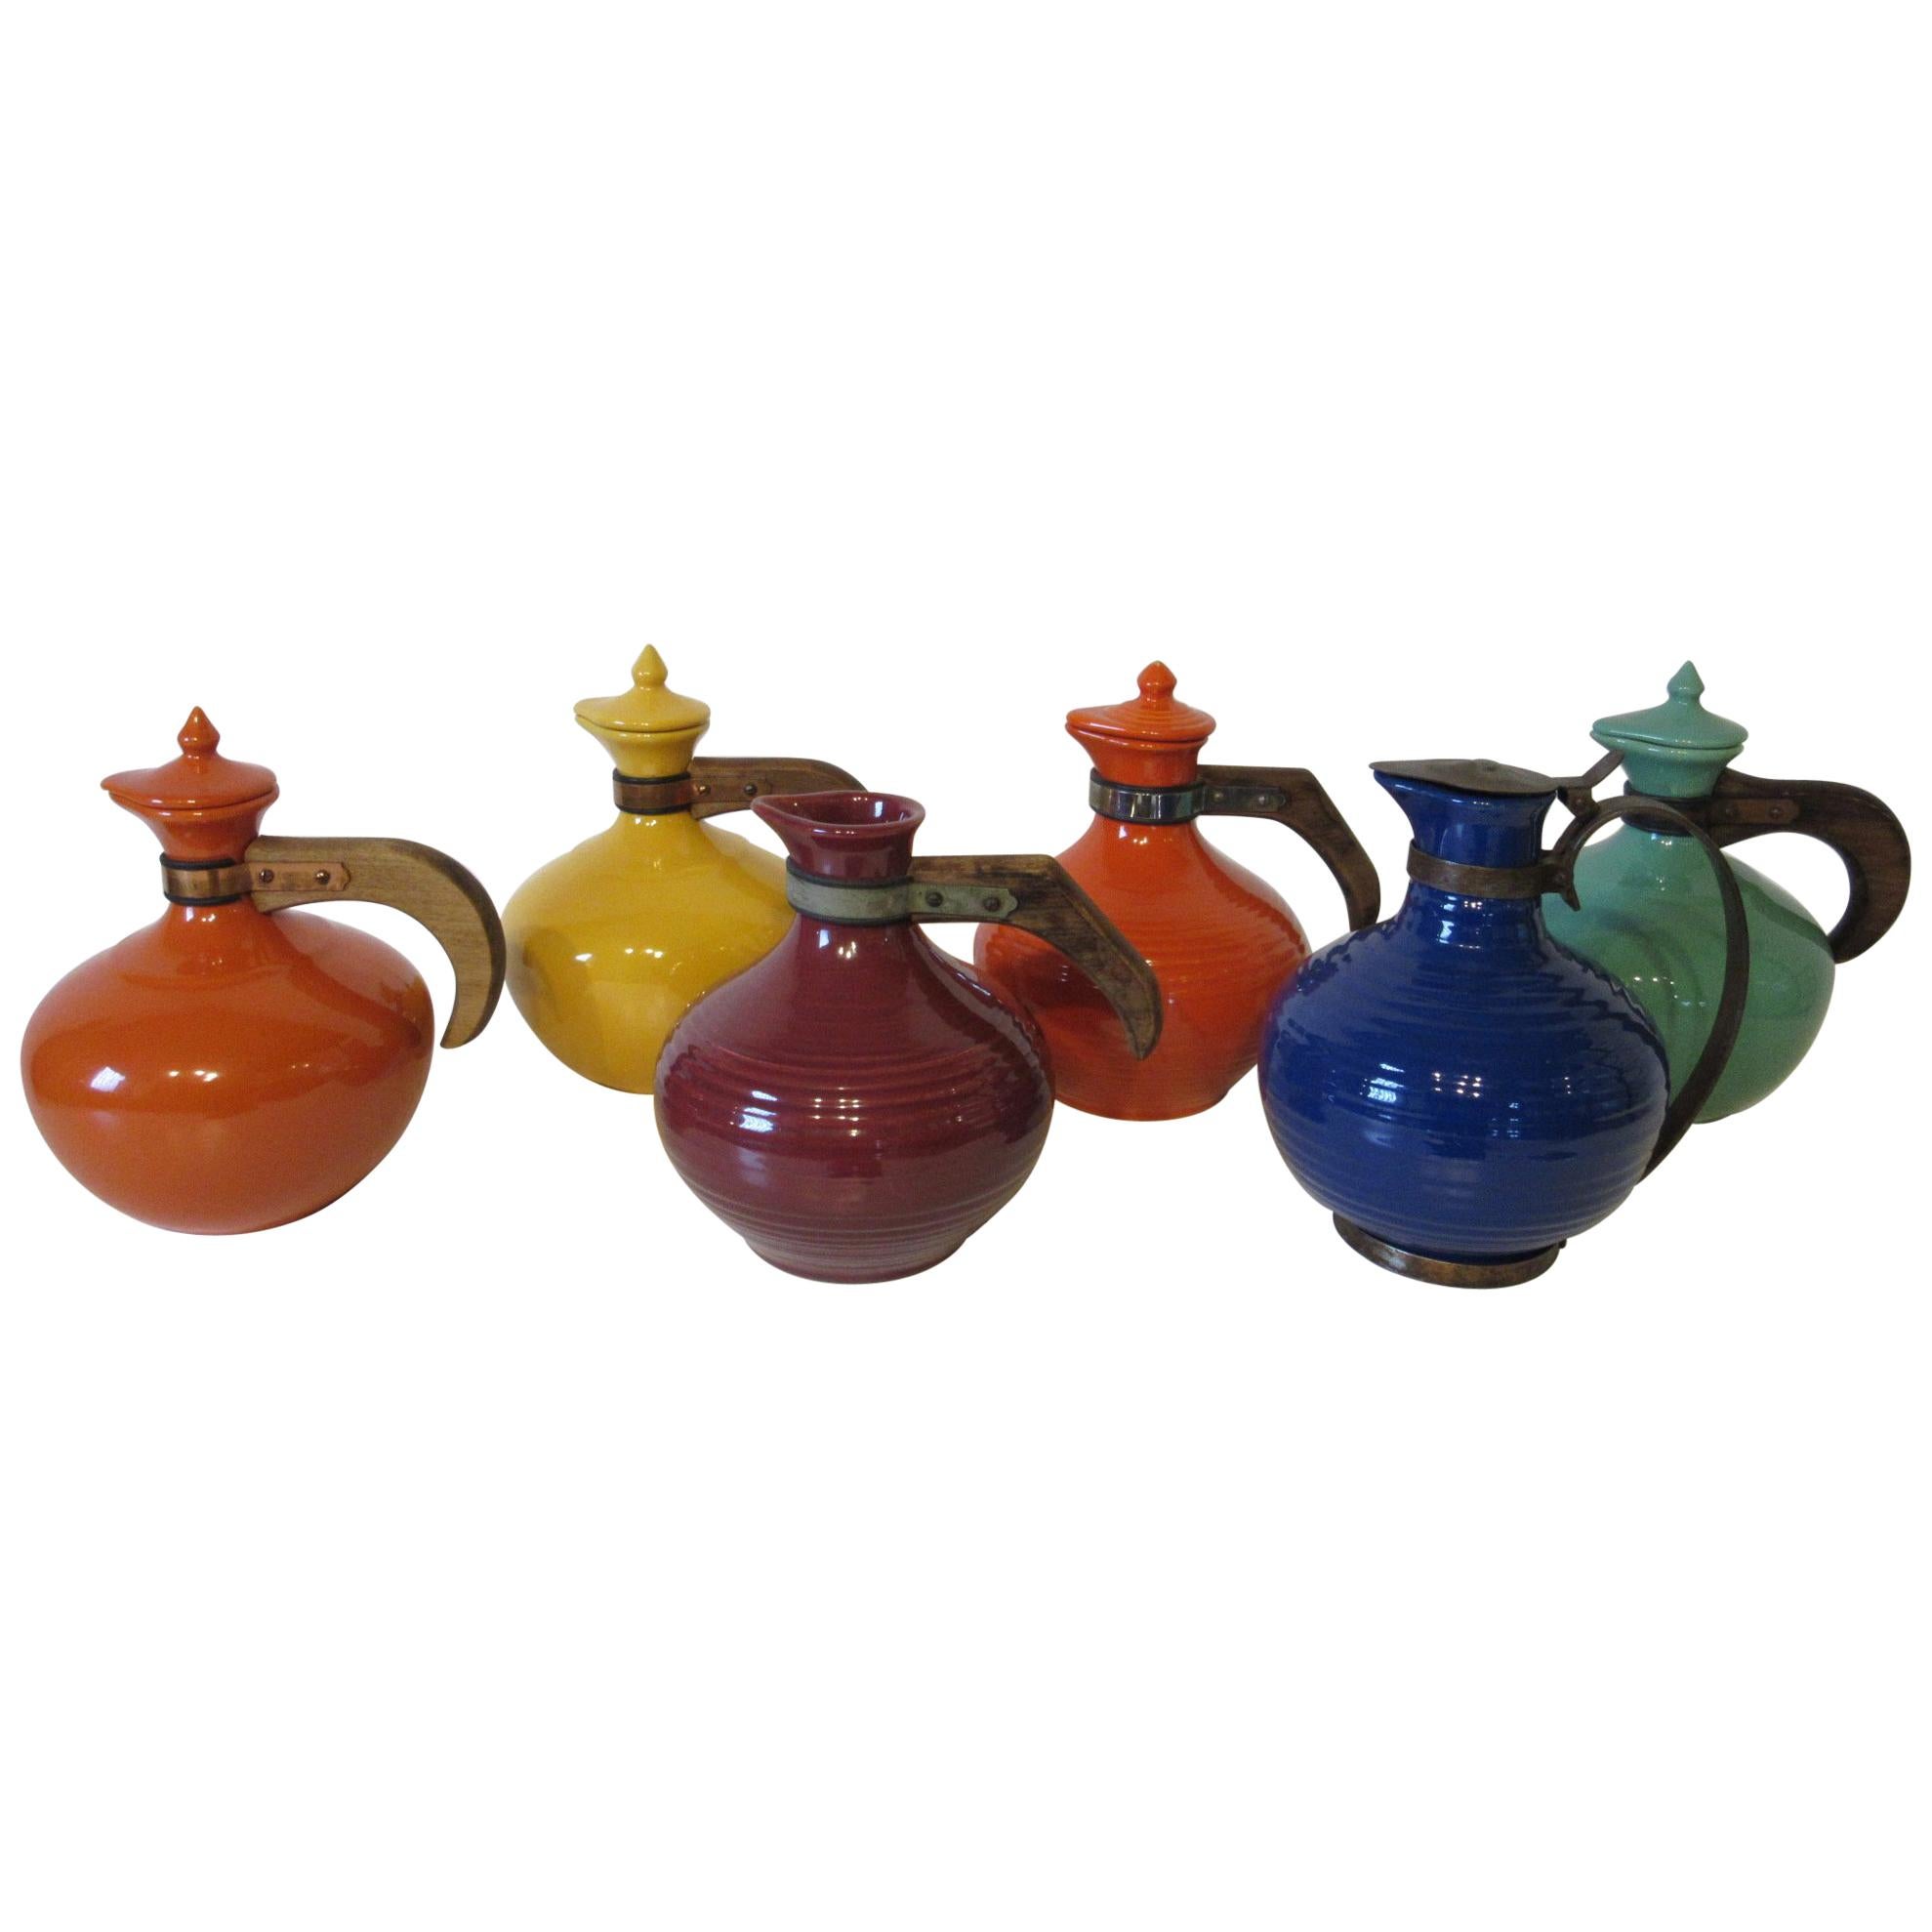 Bauer Coffee Pot / Carafe Collection